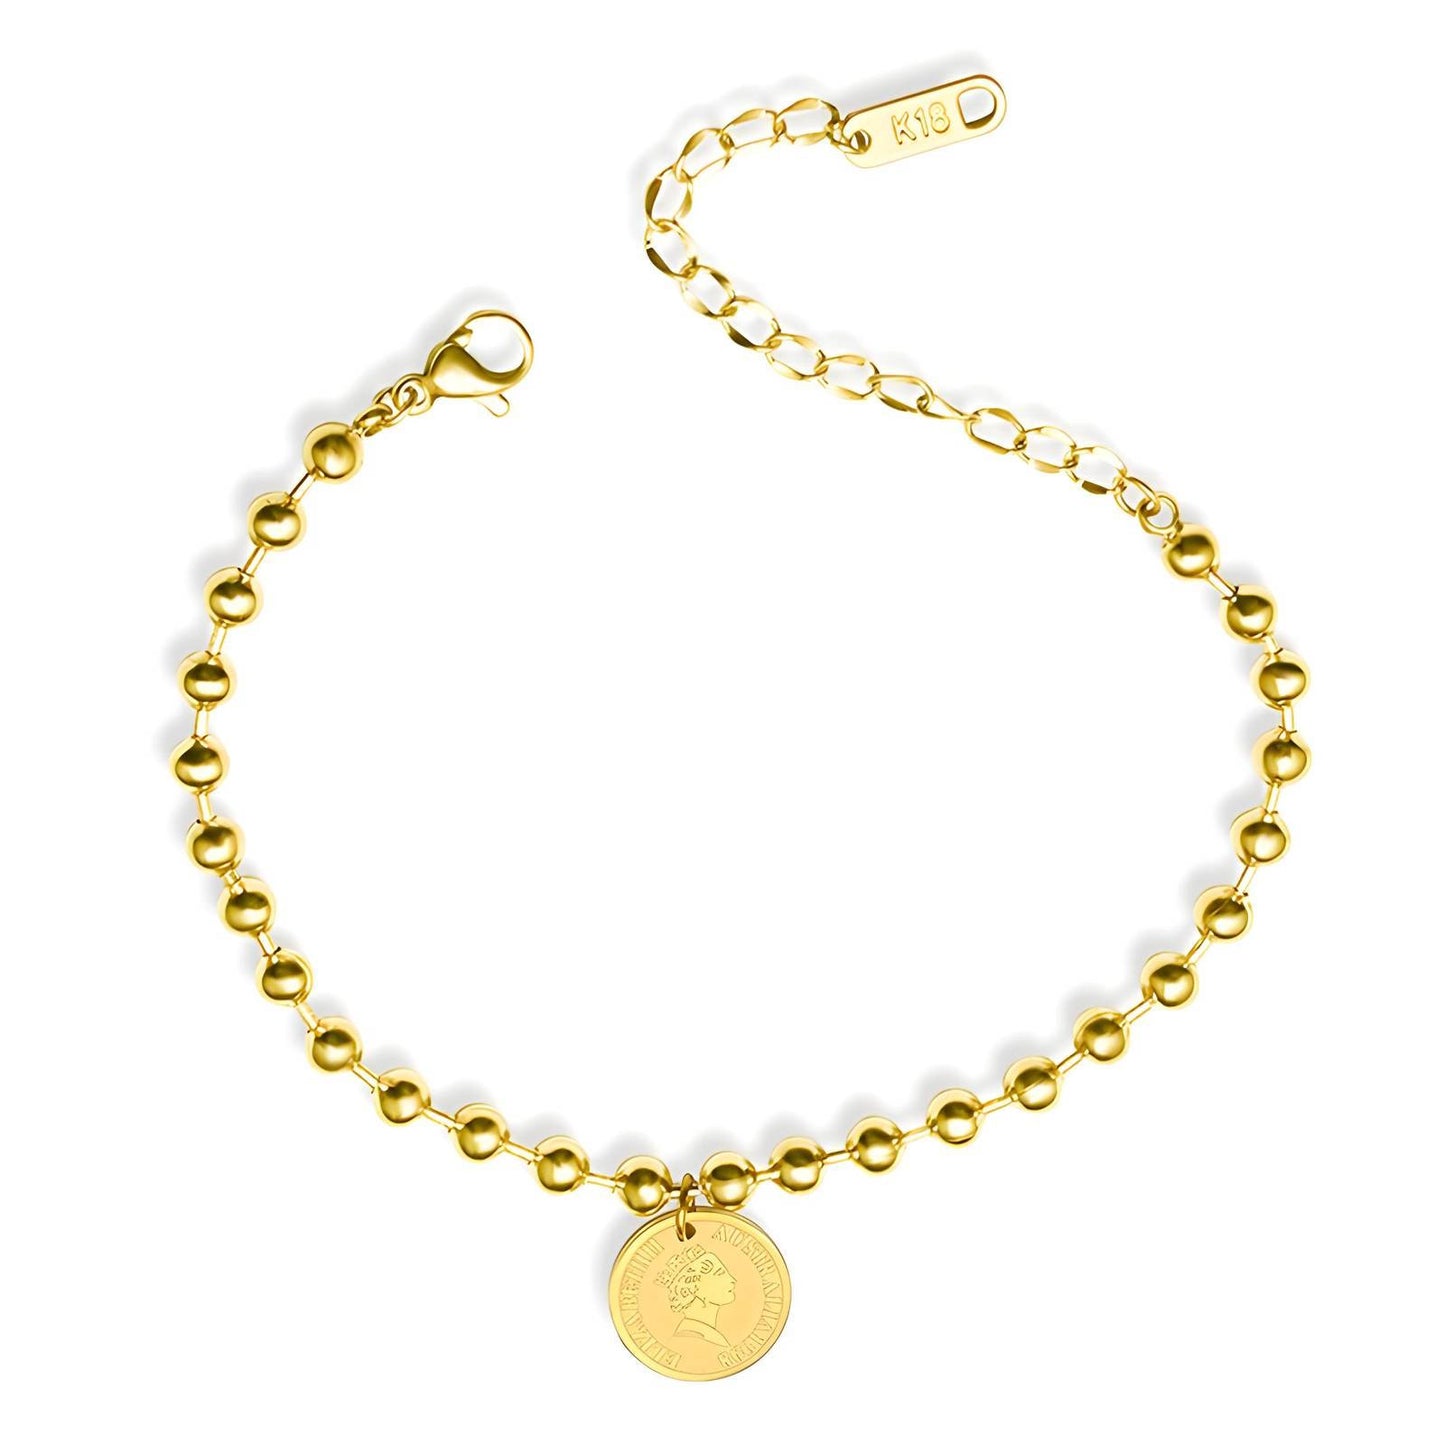 18K GOLD PLATED STAINLESS STEEL "COIN" BRACELET